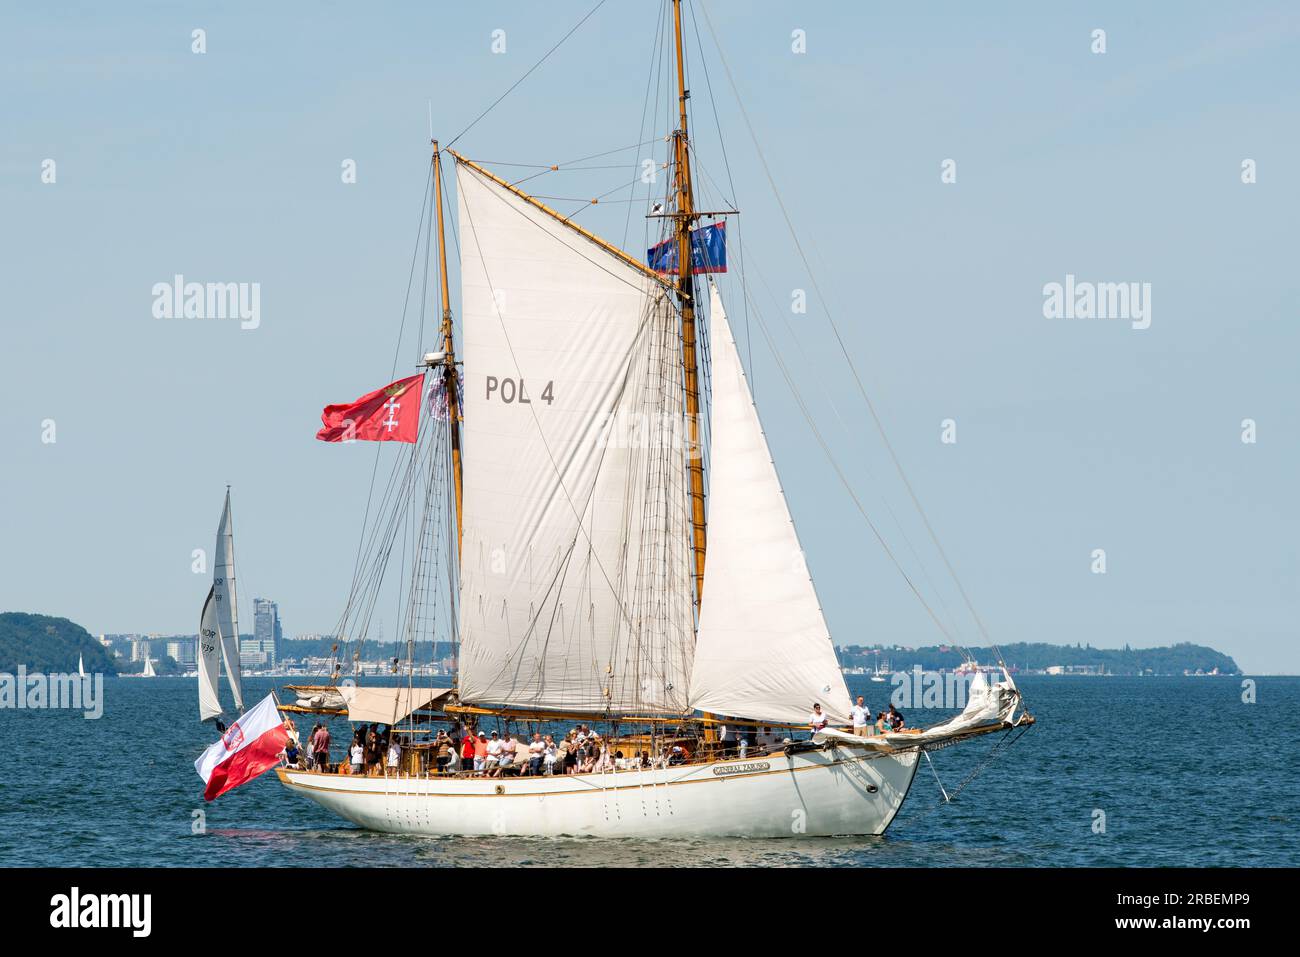 Gdansk, Poland. 09 July 2023. The General Zaruski wooden traditional gaff ketch participates in the Baltic sail ship parade in the Gdansk bay. The City of Gdansk hosts the Baltic Sail heritage sailing festival for the 27th time with participants from all the Baltic Sea neighbourhood countries. The rally is traditionally open to all vessels, including tourist yachts, cutters and motorboats. The event main programme for Sunday is held traditionally in Gdansk Bay for the thousands of visitors, tourists and locals to enjoy the happening. Credit: Ognyan Yosifov/Alamy Live News Stock Photo